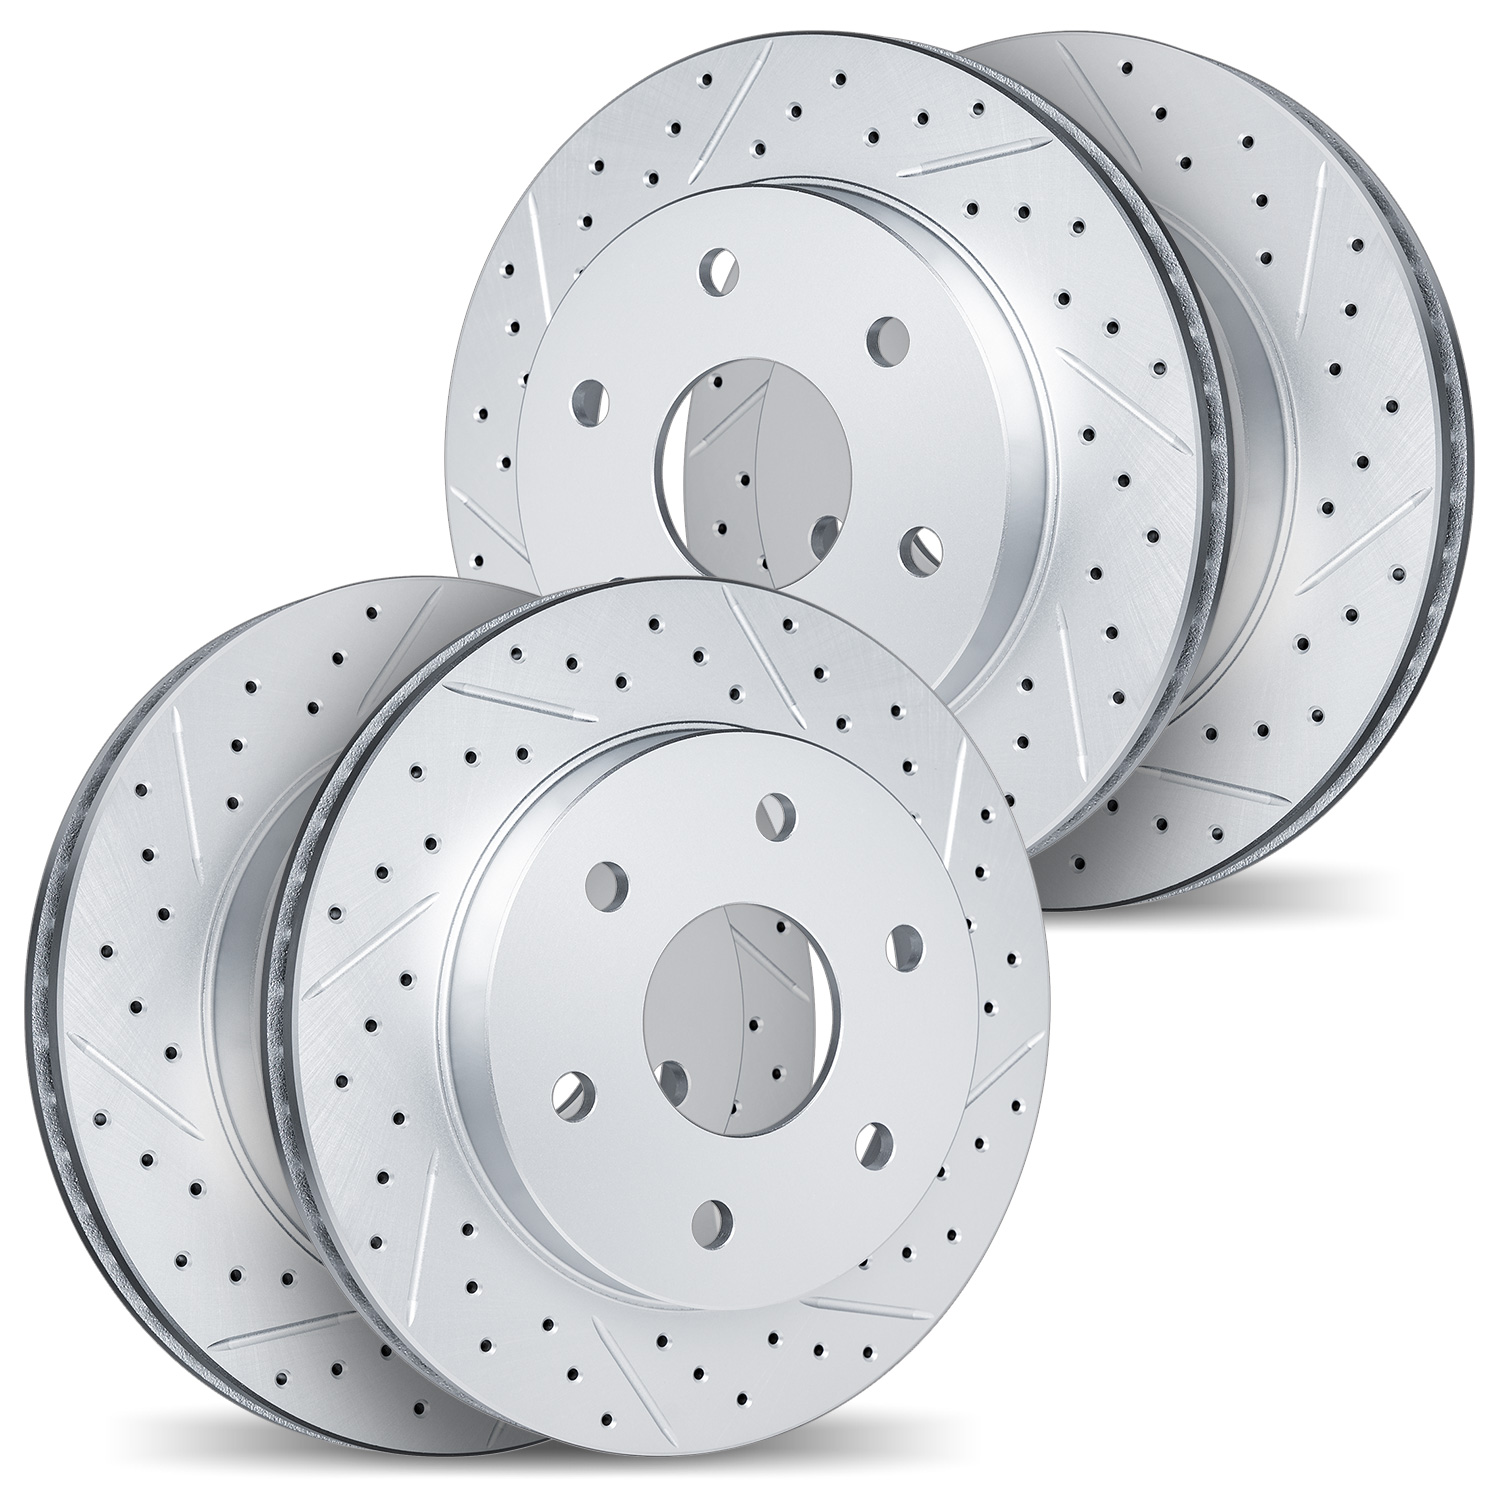 2004-40043 Geoperformance Drilled/Slotted Brake Rotors, Fits Select Mopar, Position: Front and Rear